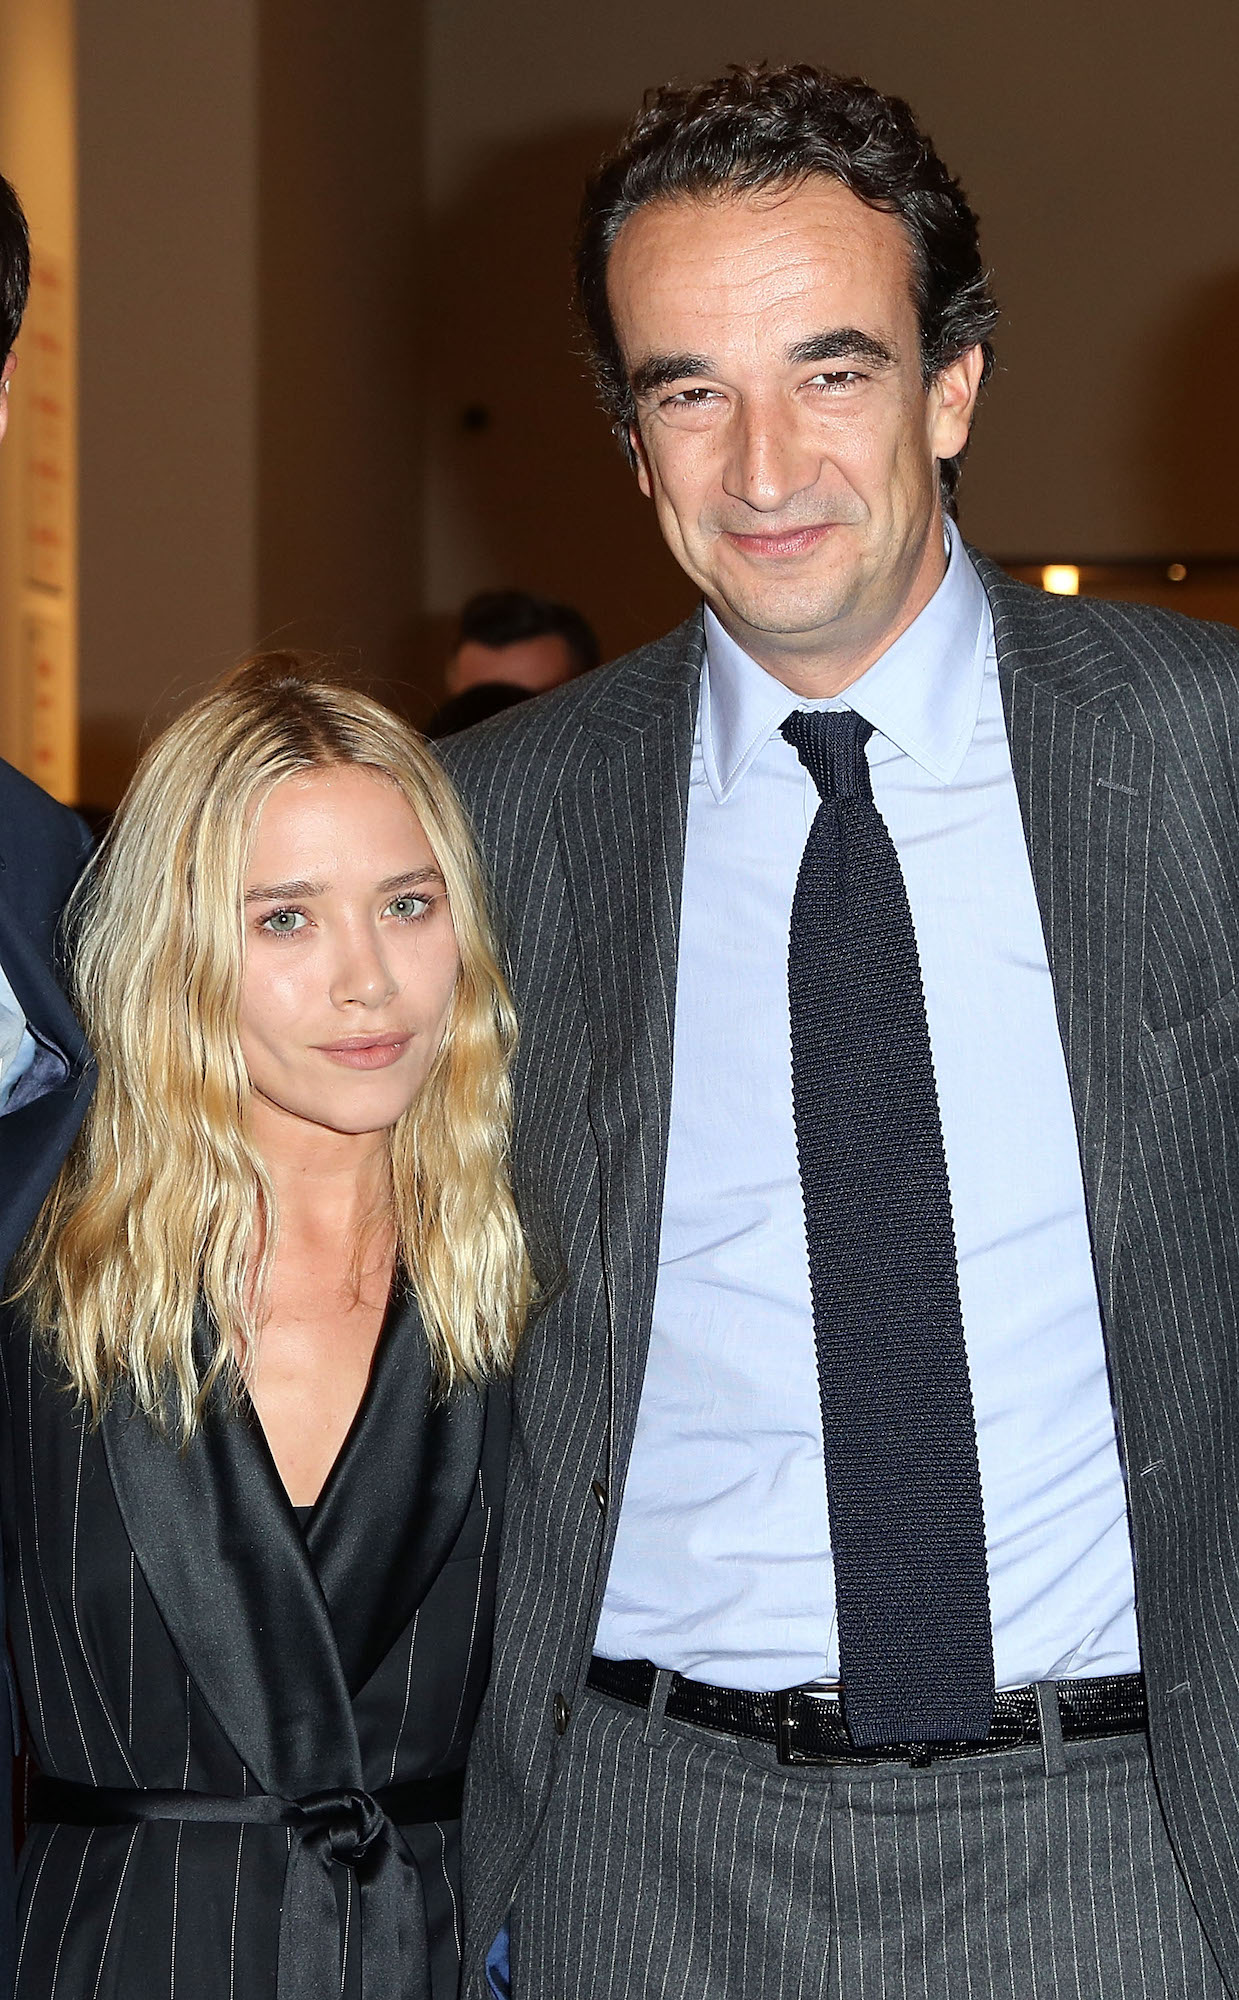 Mary-Kate Olsen and Olivier Sarkozy attending the 2013 "Take Home A Nude" Benefit Art Auction And Party